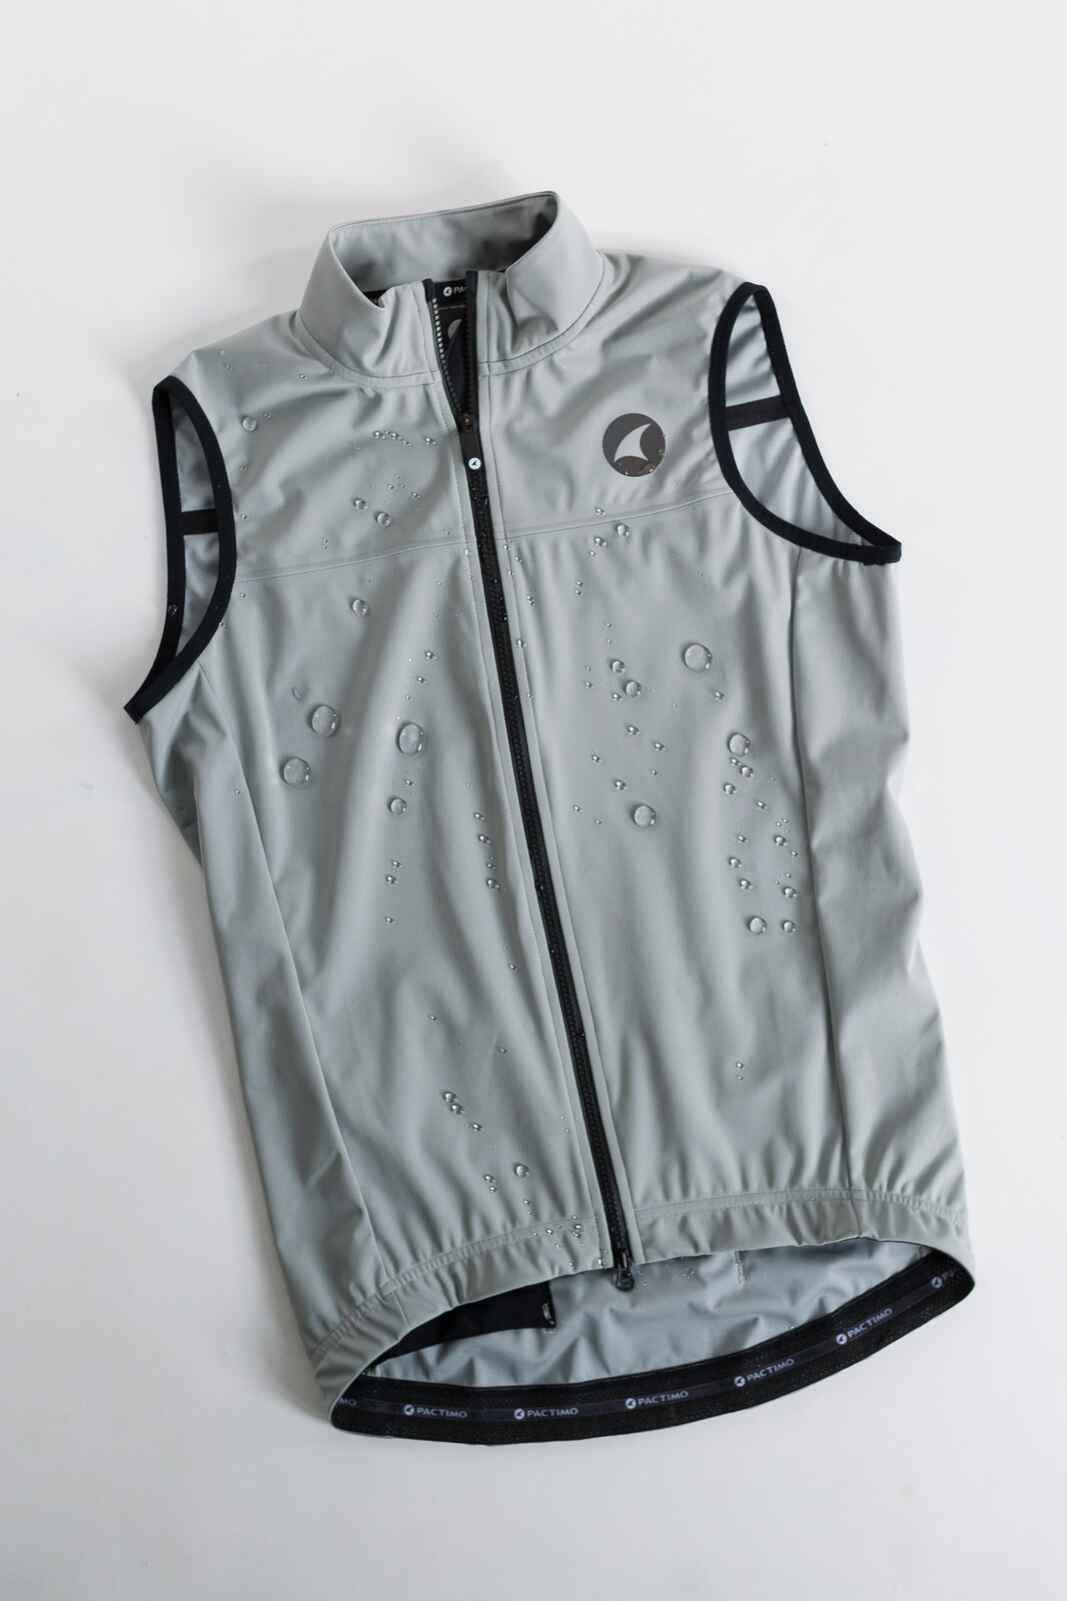 Men's Cycling Vest - Storm+ Water-Resistant Fabric